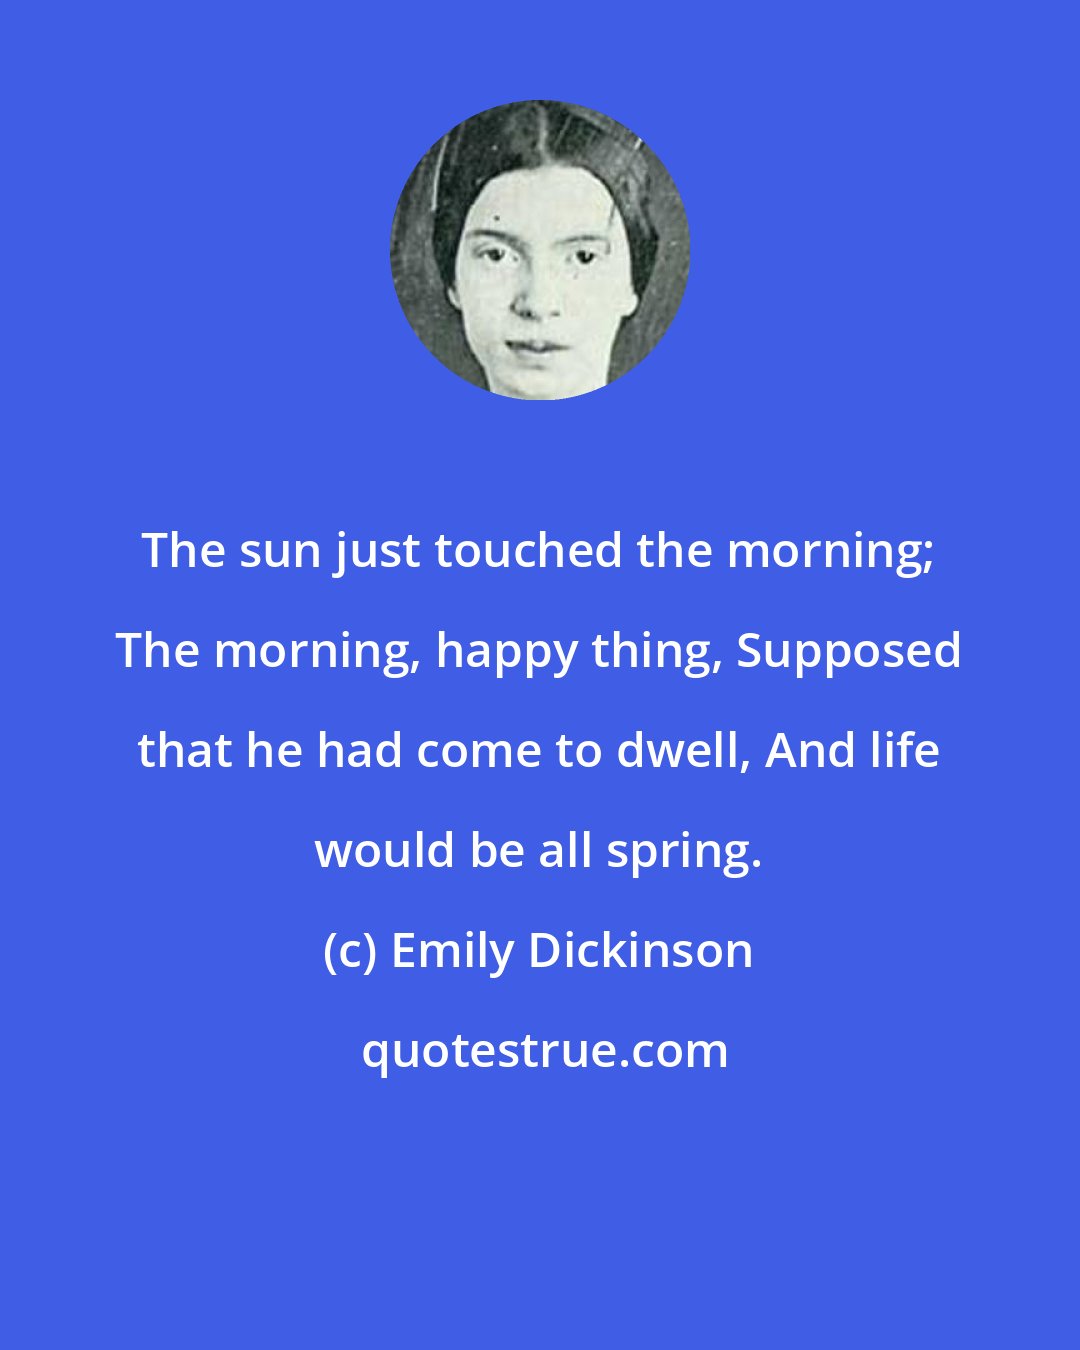 Emily Dickinson: The sun just touched the morning; The morning, happy thing, Supposed that he had come to dwell, And life would be all spring.